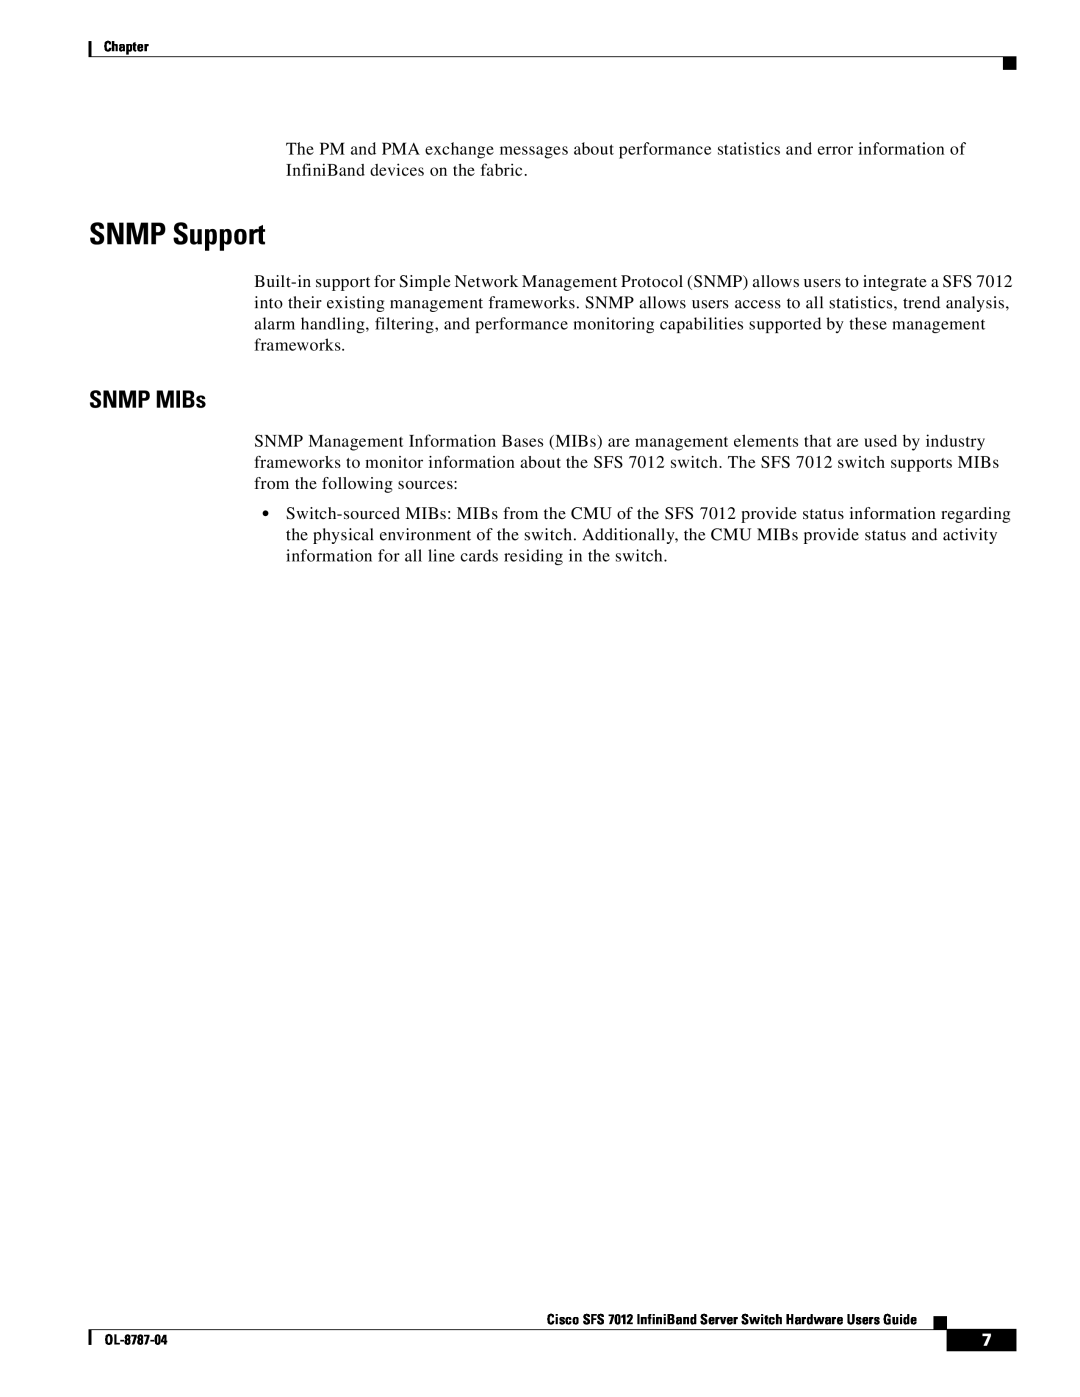 Cisco Systems SFS 7012 manual SNMP Support, SNMP MIBs 